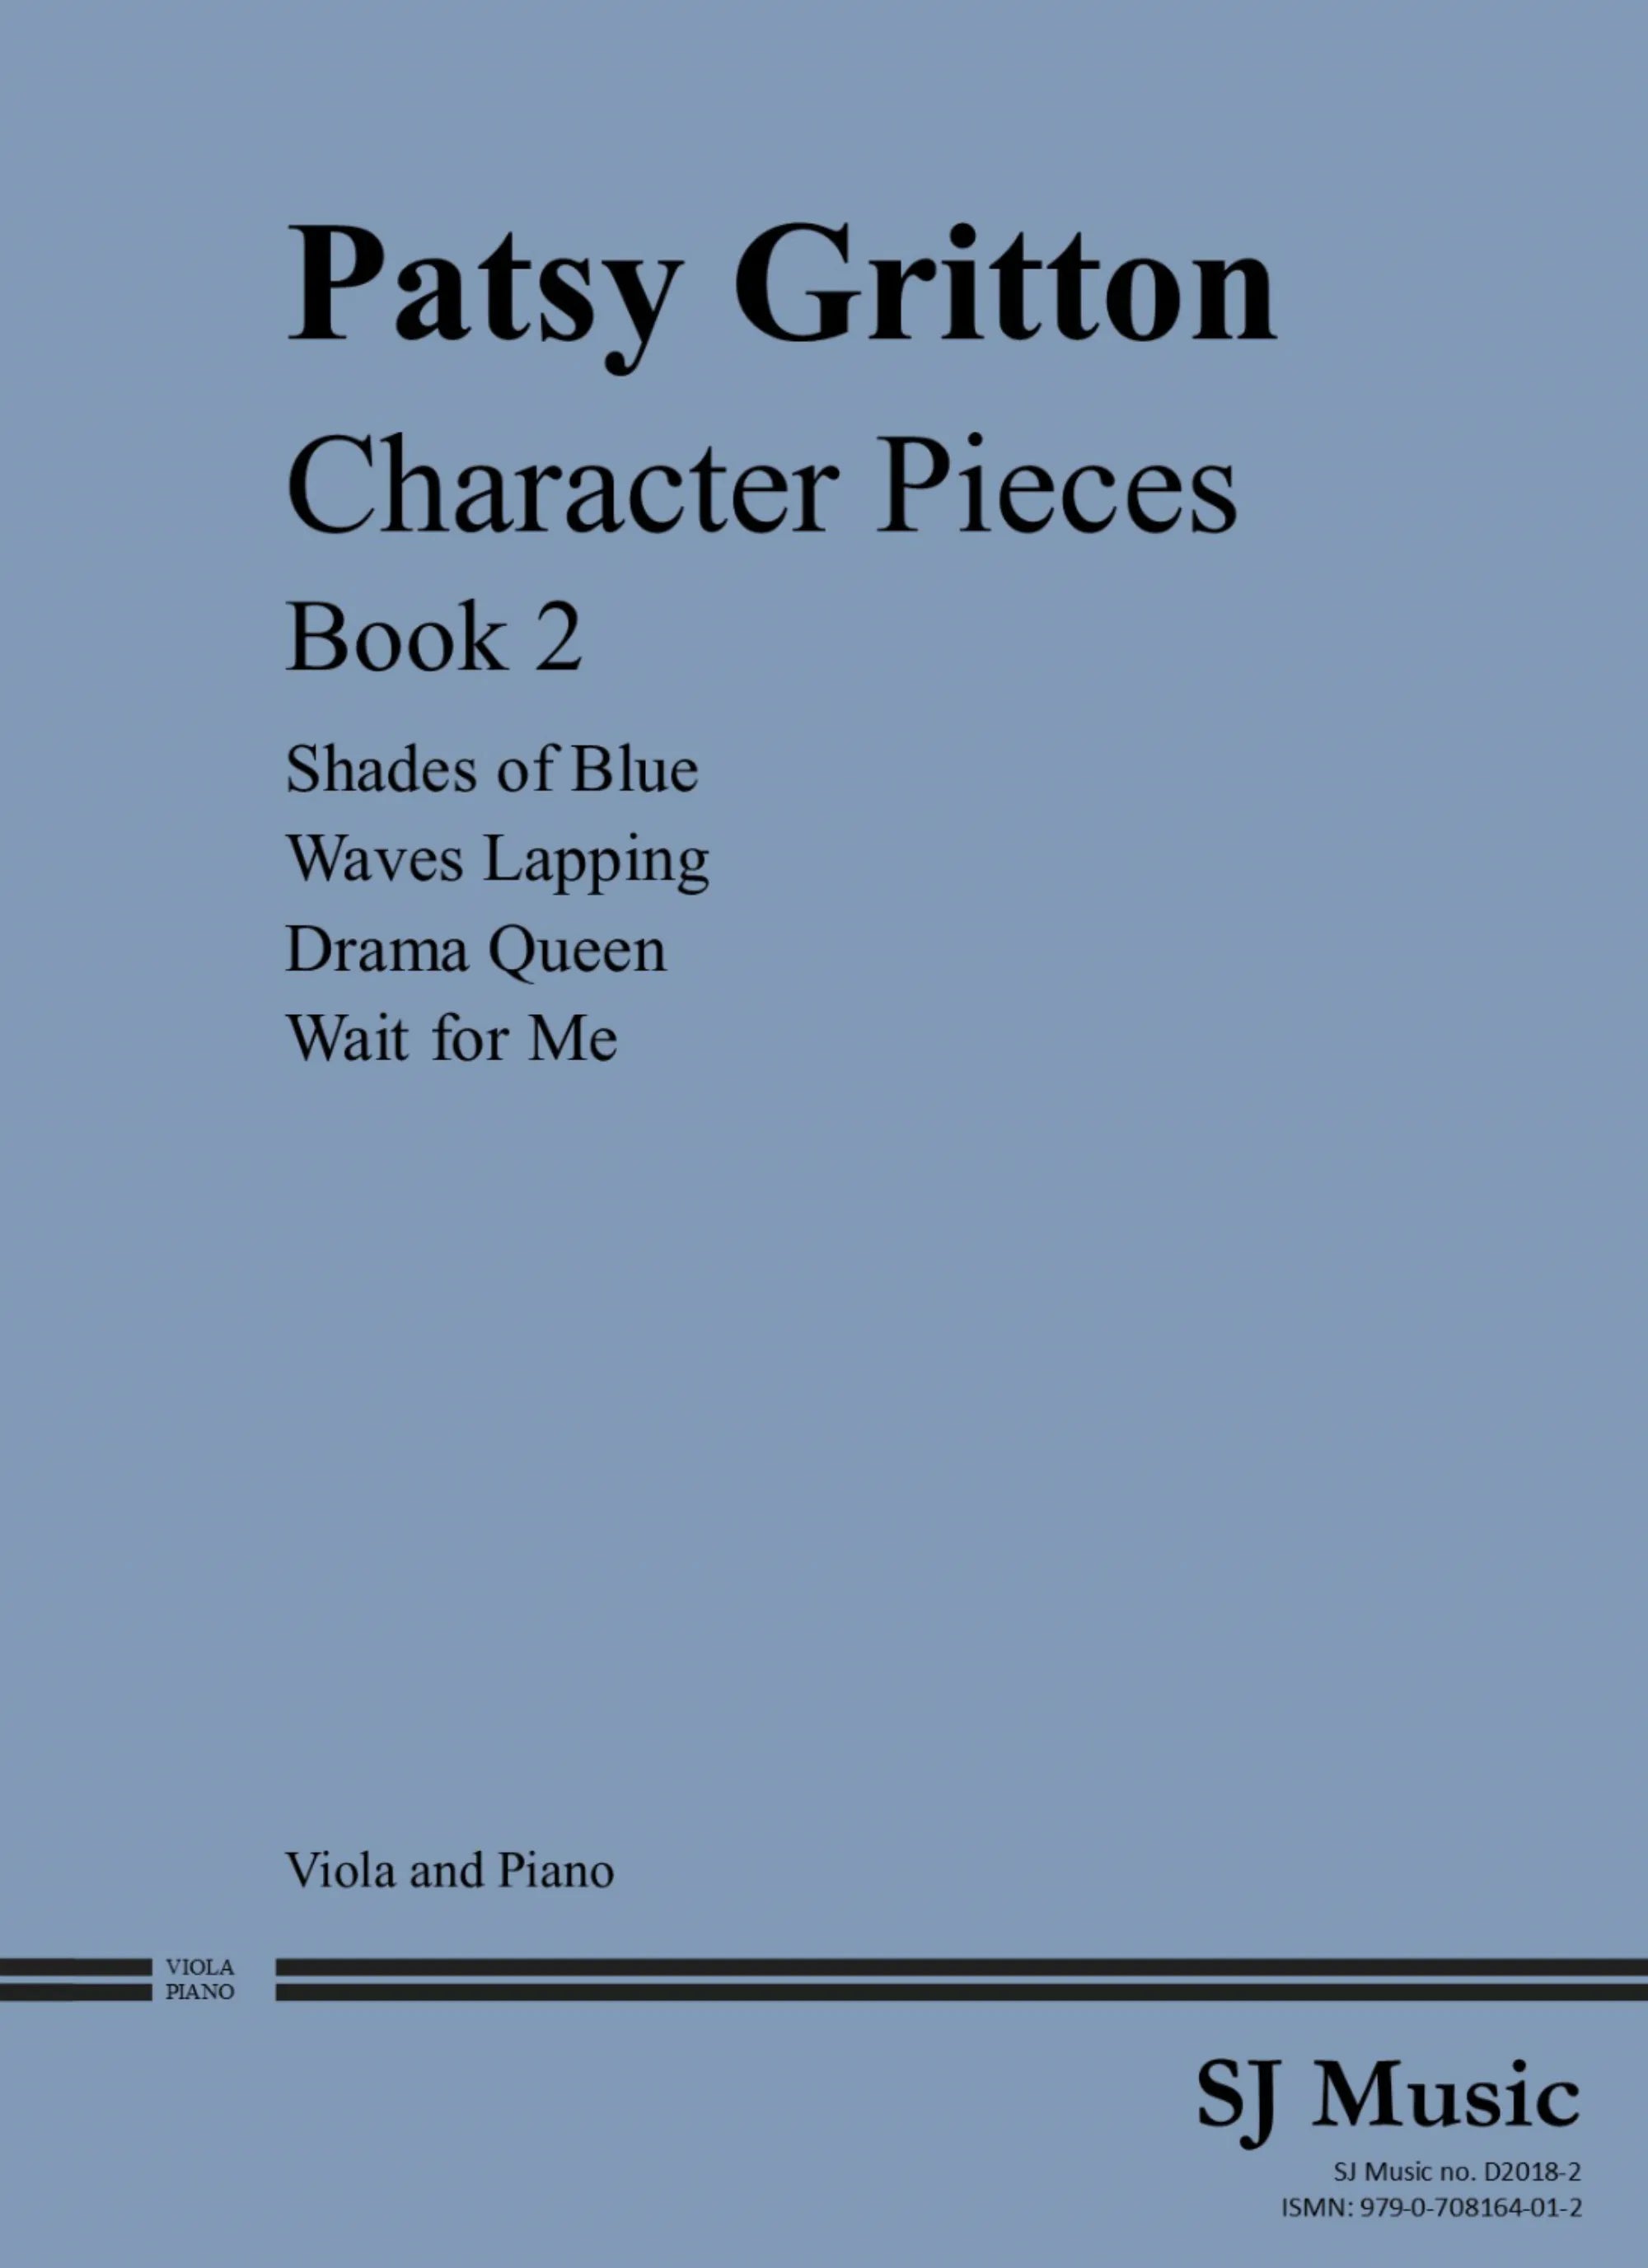 Pa. Gritton: Character Pieces - Book 2